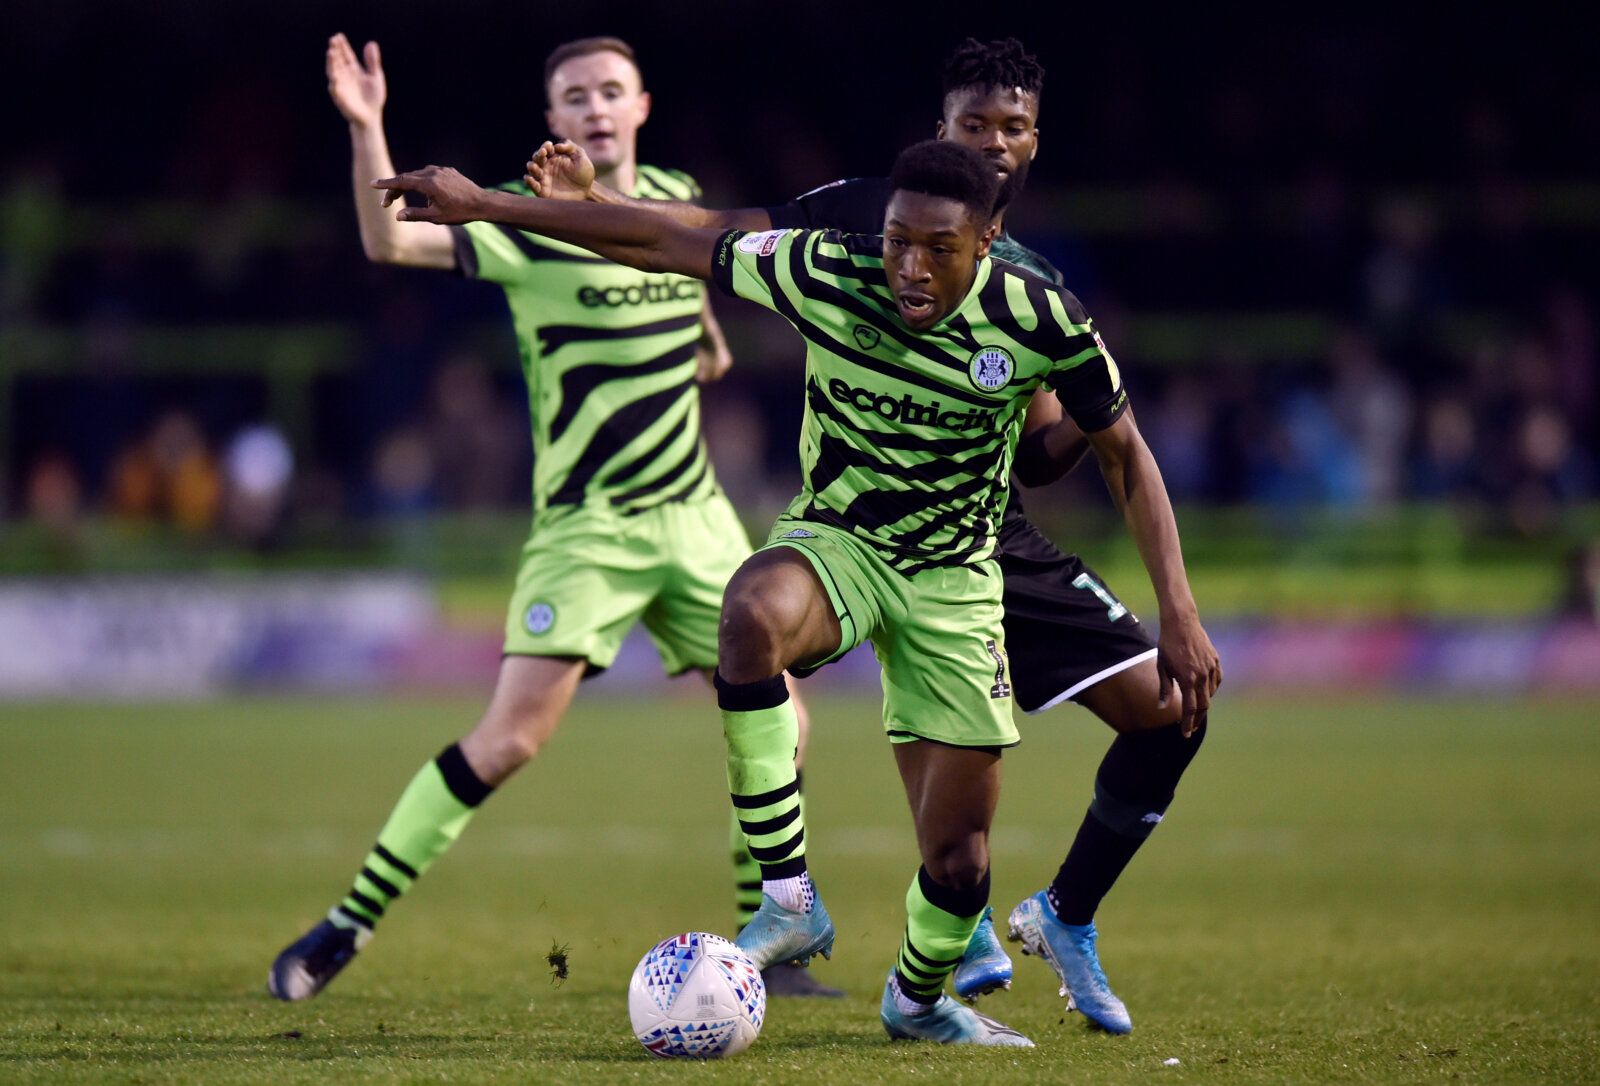 Soccer Football - League Two - Forest Green Rovers v Plymouth Argyle - The New Lawn Stadium, Nailsworth, Britain - November 16, 2019  Forest Green Rovers' Ebou Adams in action with Plymouth Argyle's Joel Grant  Action Images/Adam Holt  EDITORIAL USE ONLY. No use with unauthorized audio, video, data, fixture lists, club/league logos or 